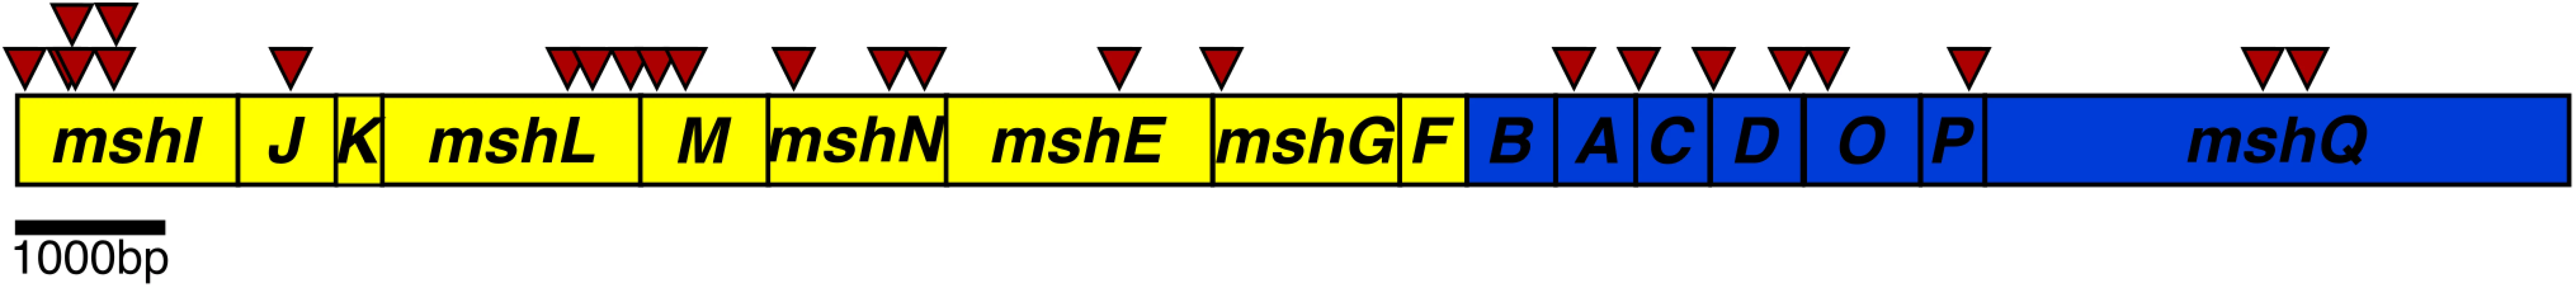 Schematic representation of the transposon insertions in the Msh operons.